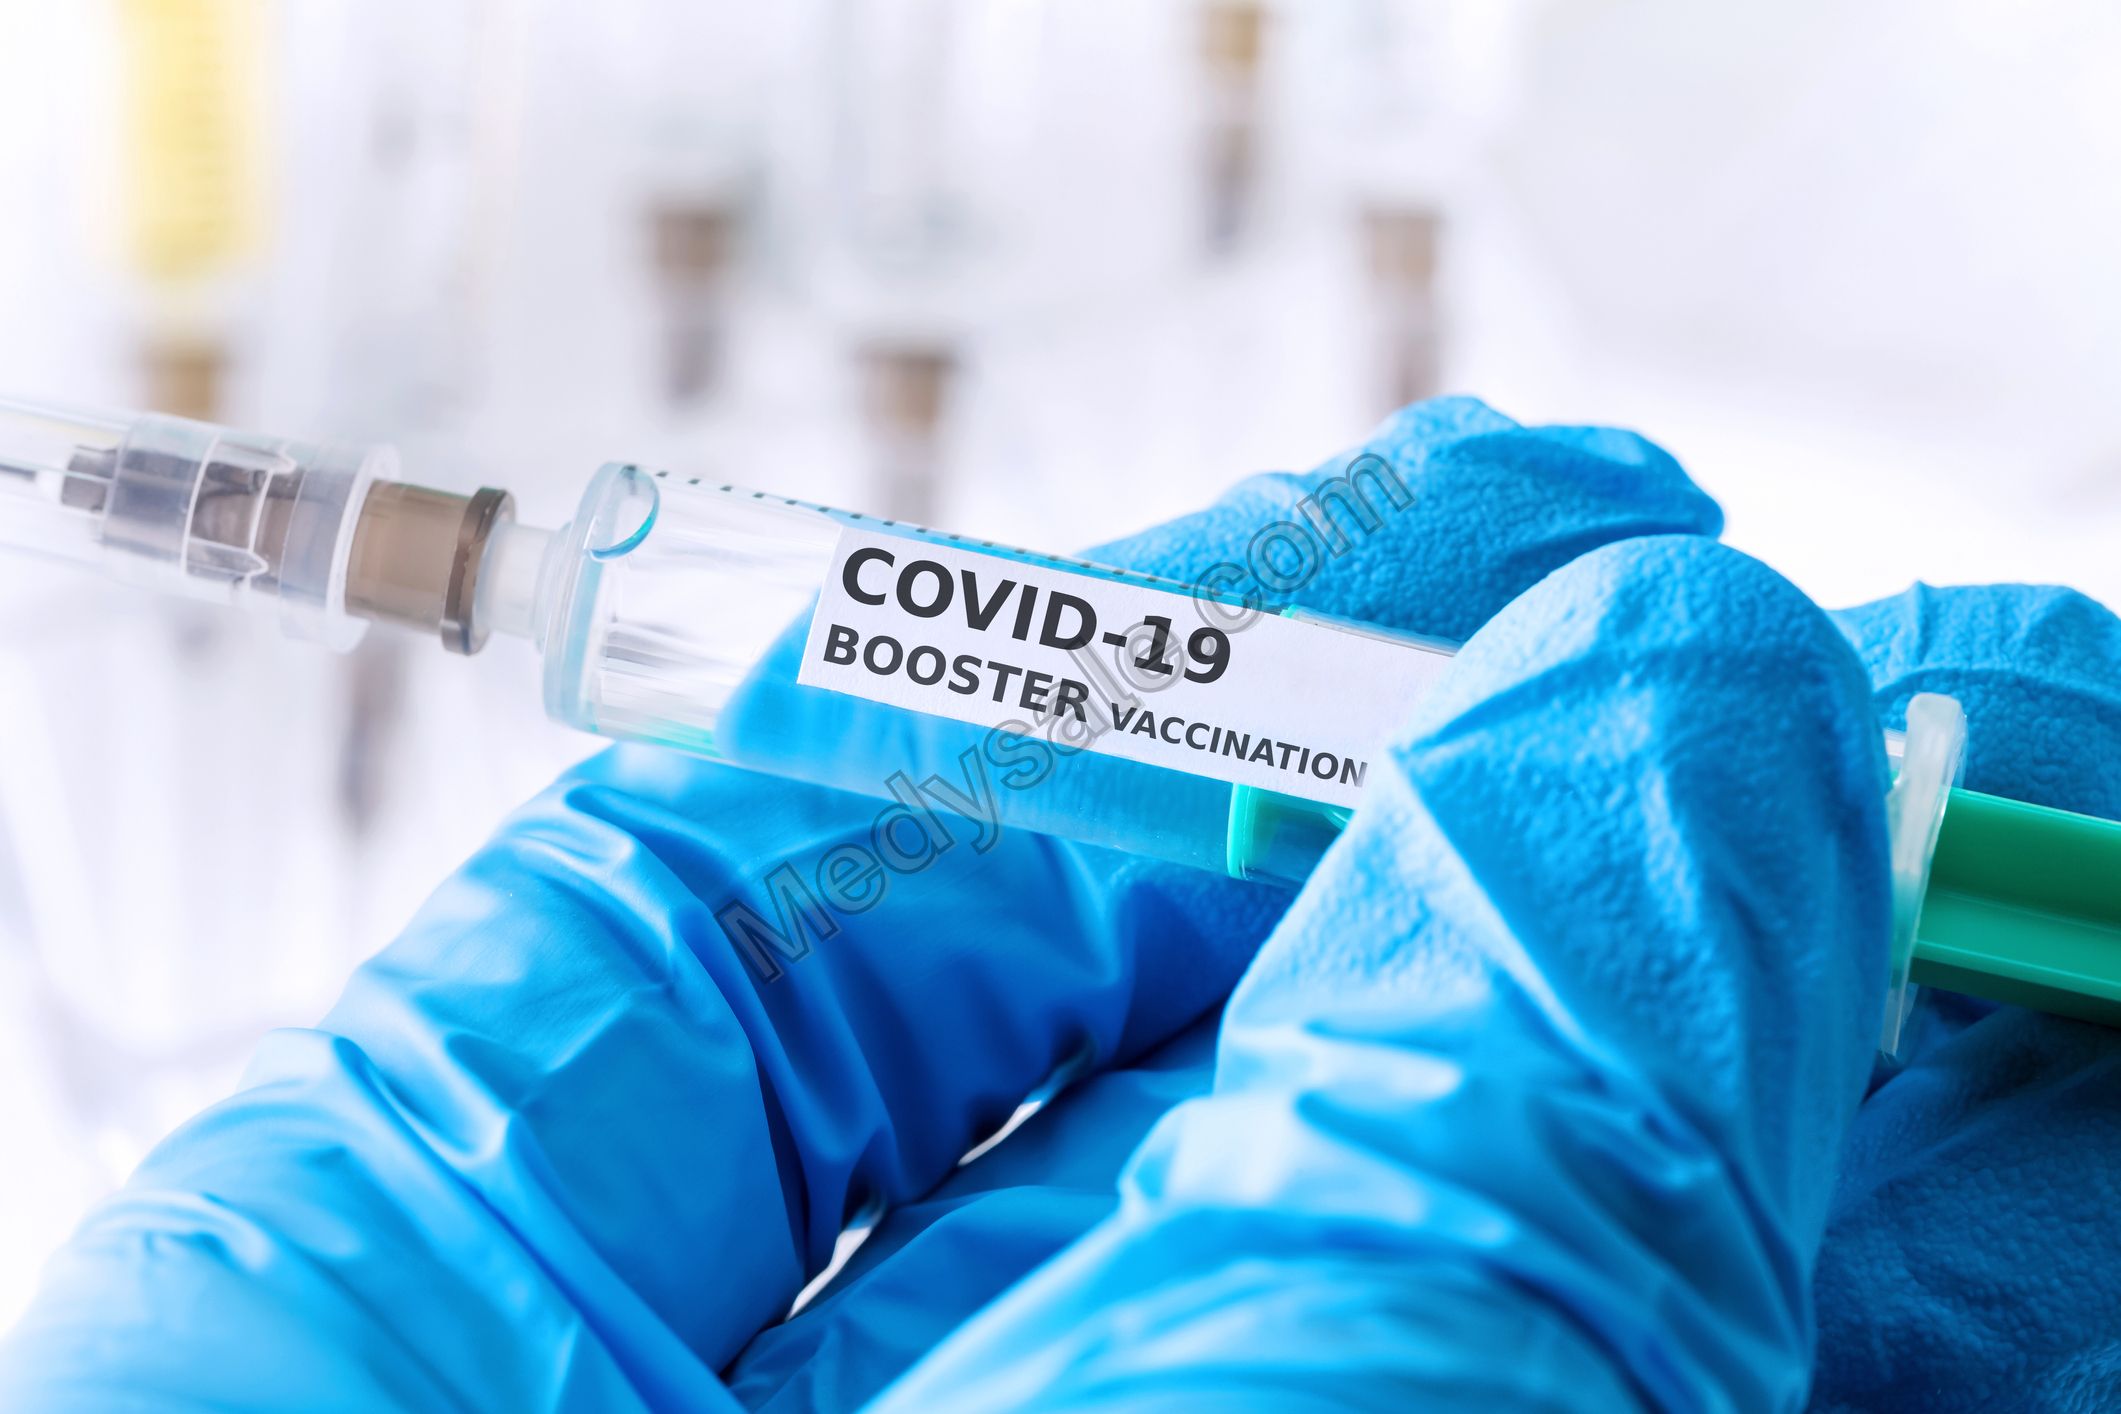 Do 5-to-11-Year-Olds Need Covid-19 Booster Shots?